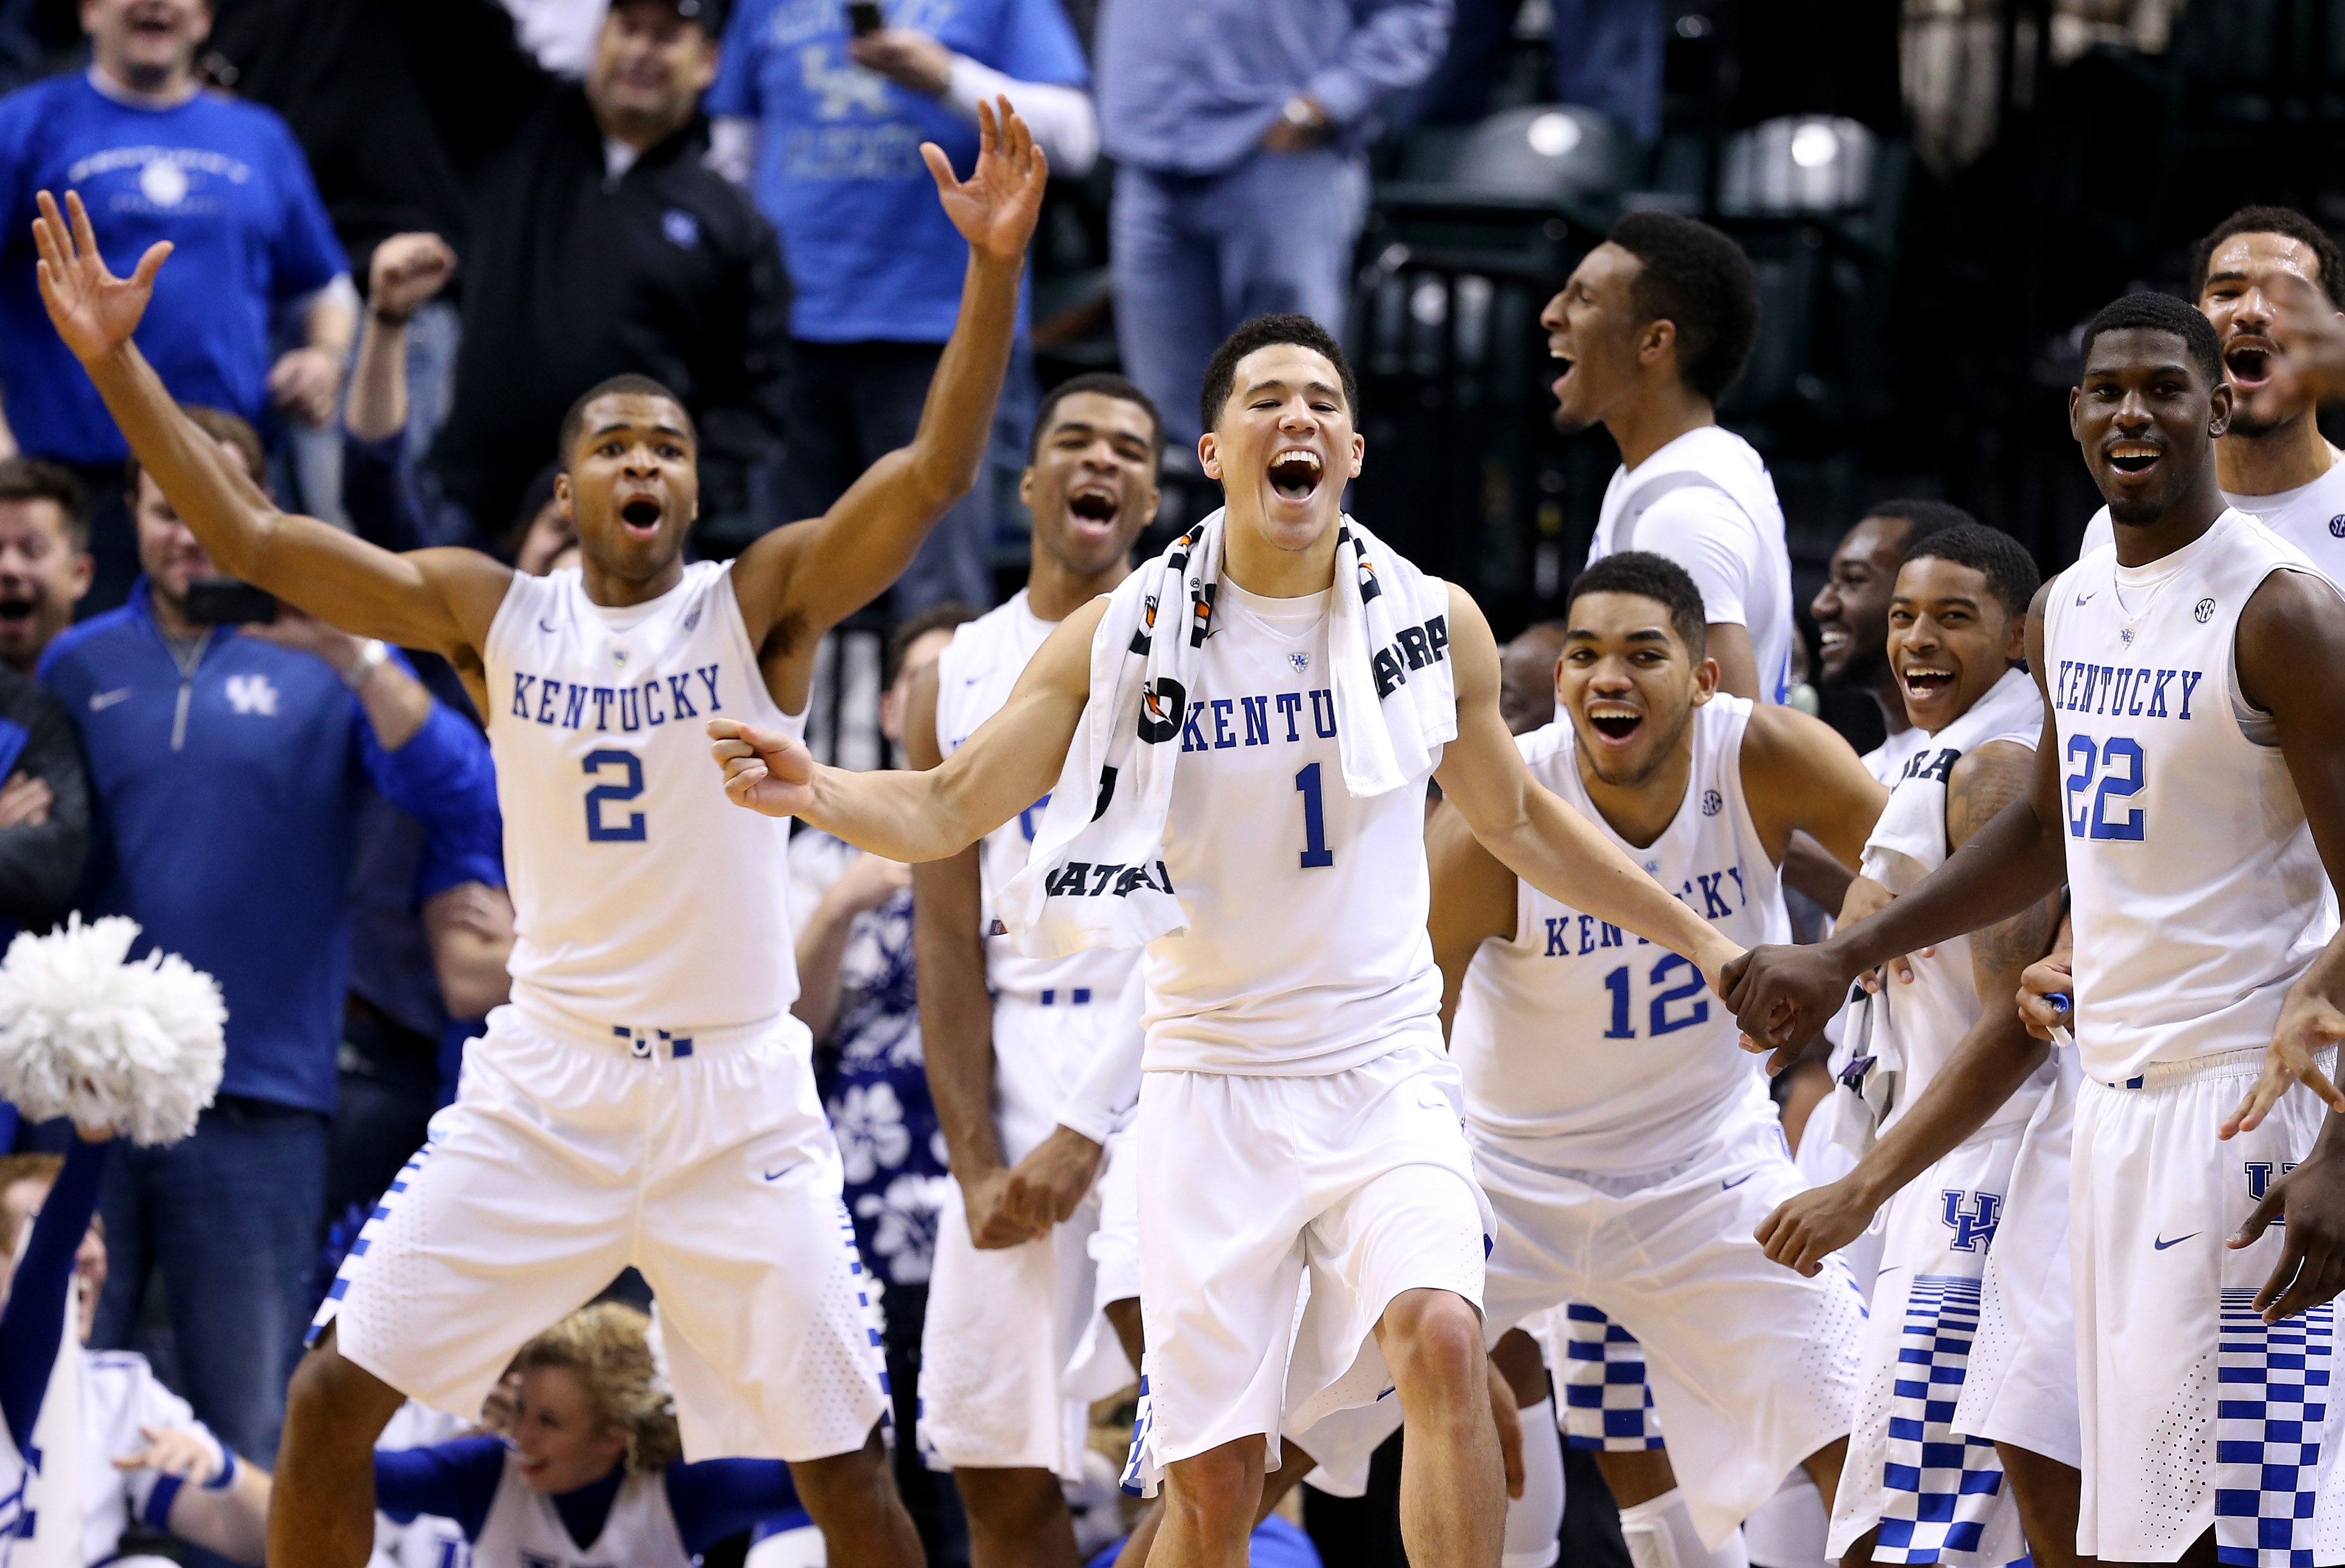 Kentucky basketball isn’t going undefeated or winning the national title | For The Win